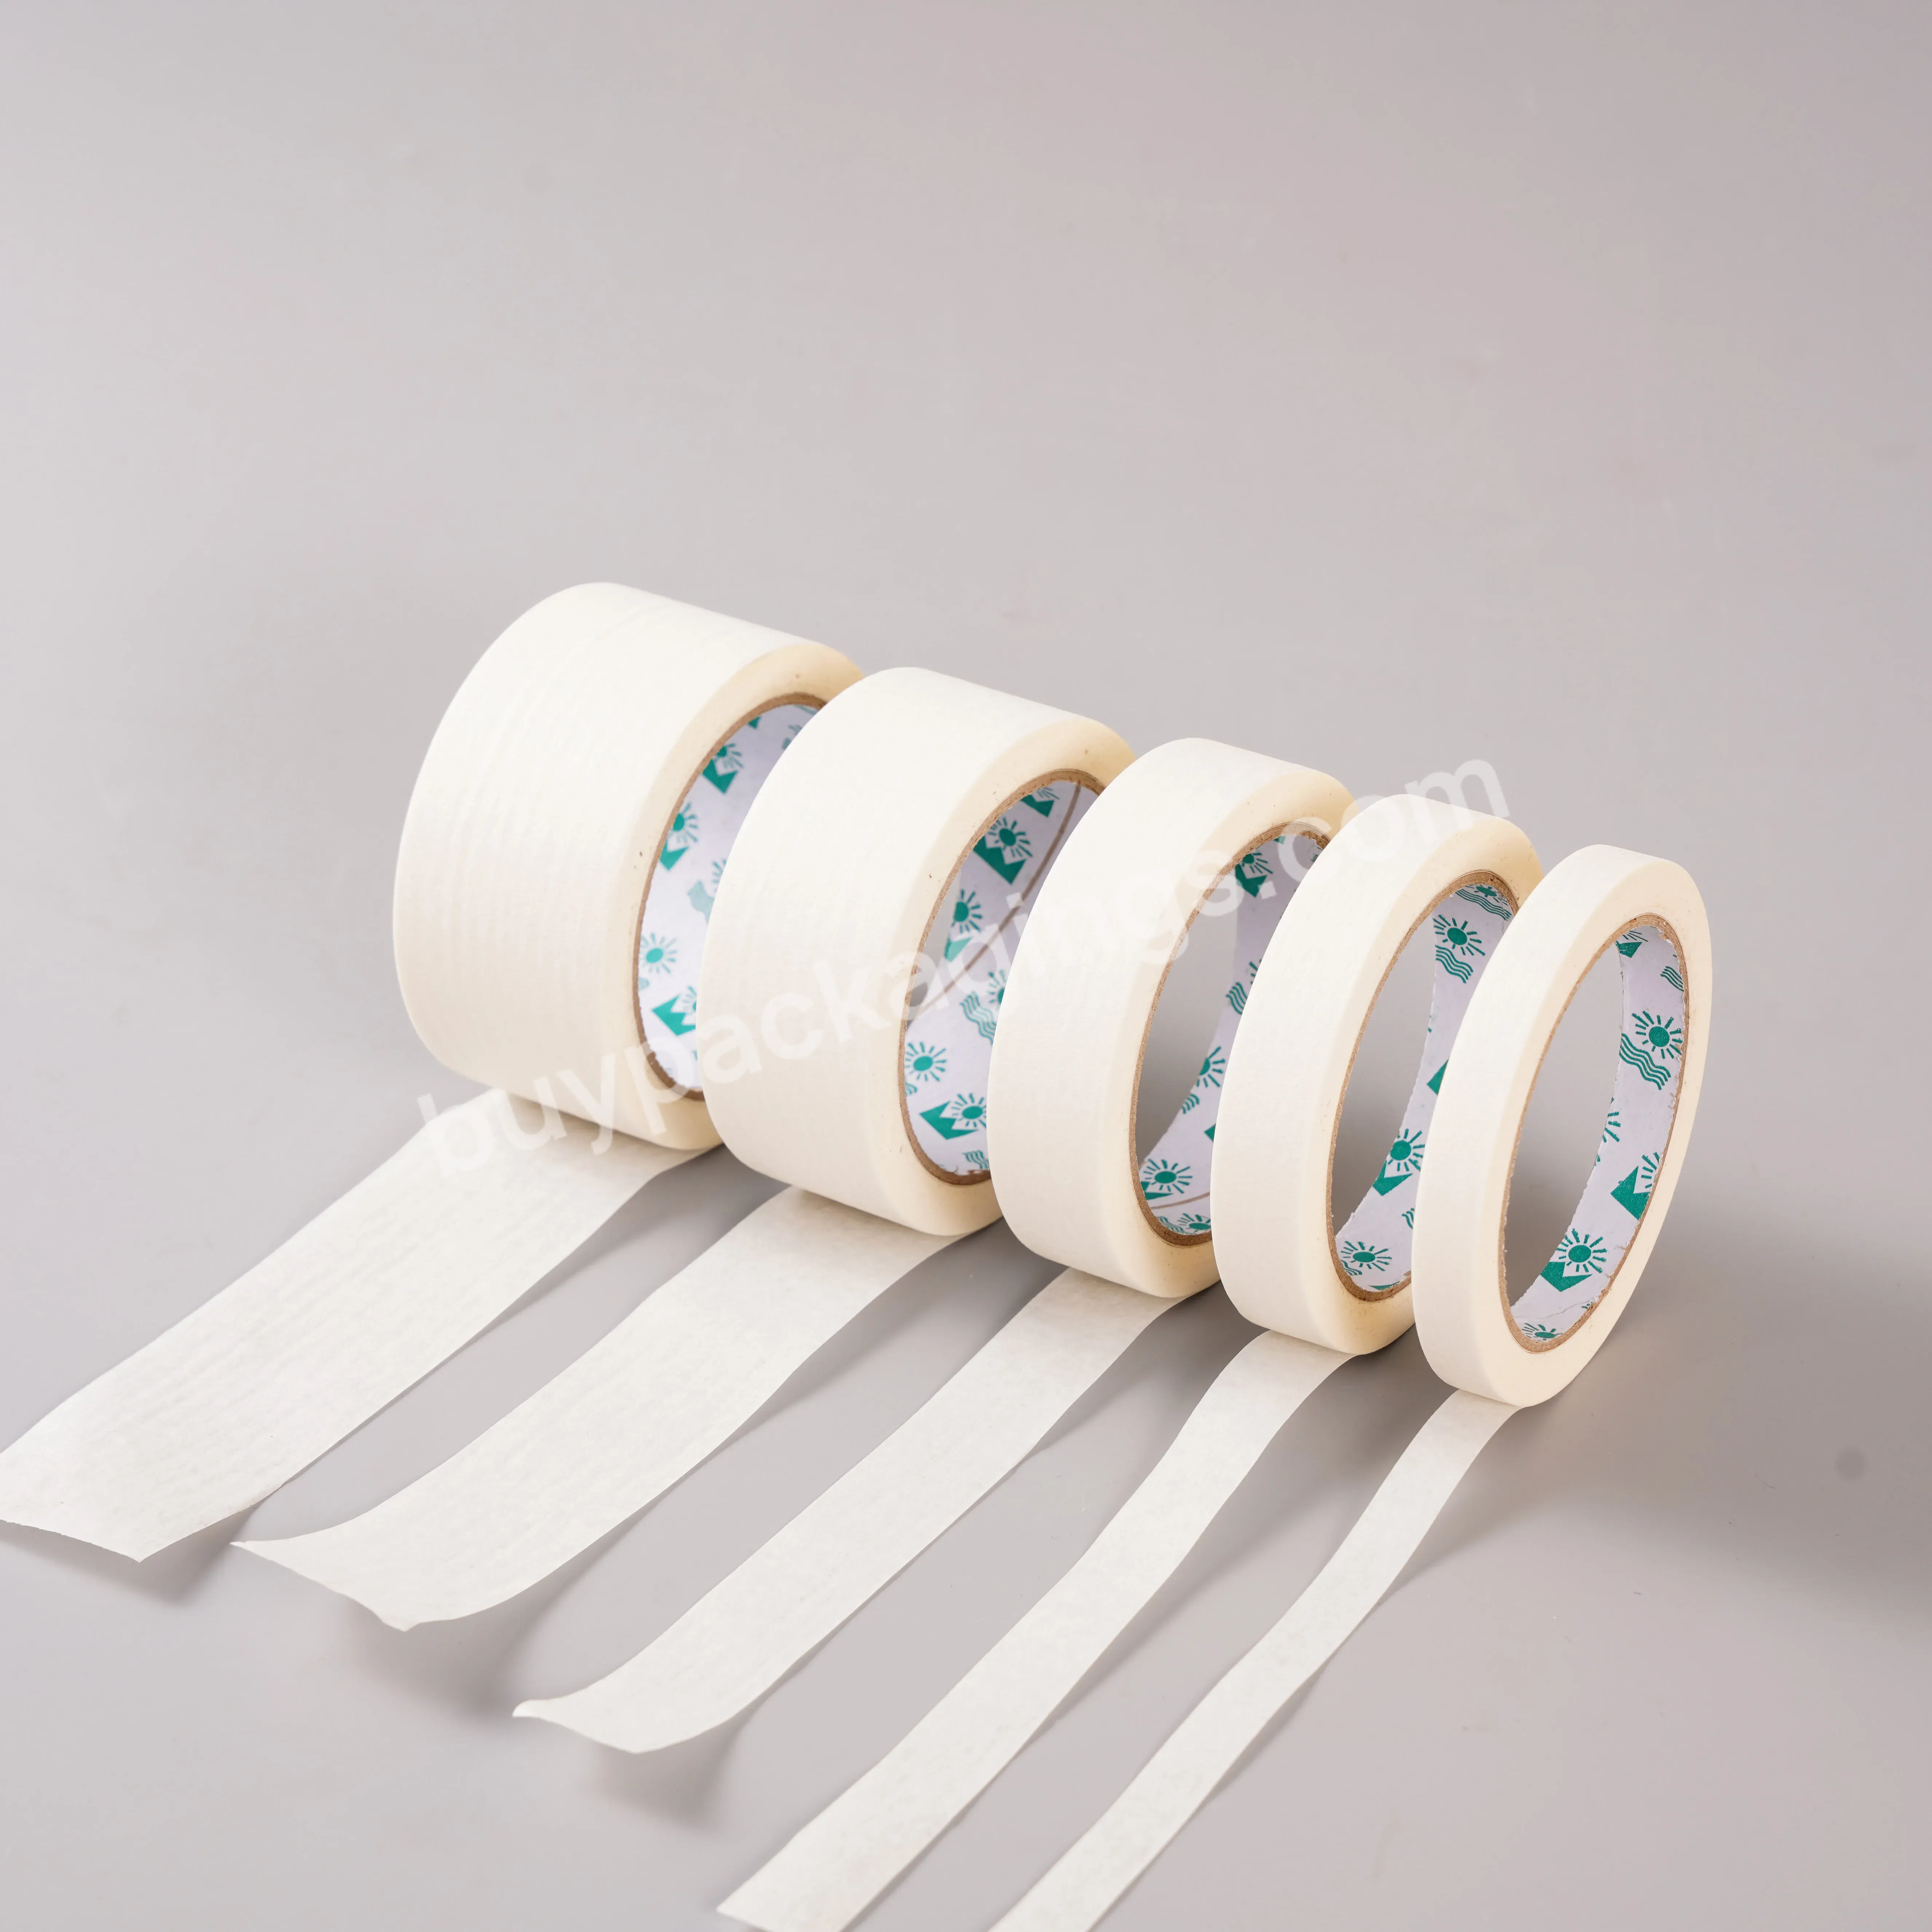 Thick Strong Adhesive Masking Tape For Car Or Wall Paint Masking - Buy Masking Tape,Adhesive Paper Tape,Thick Strong Adhesive Tape.